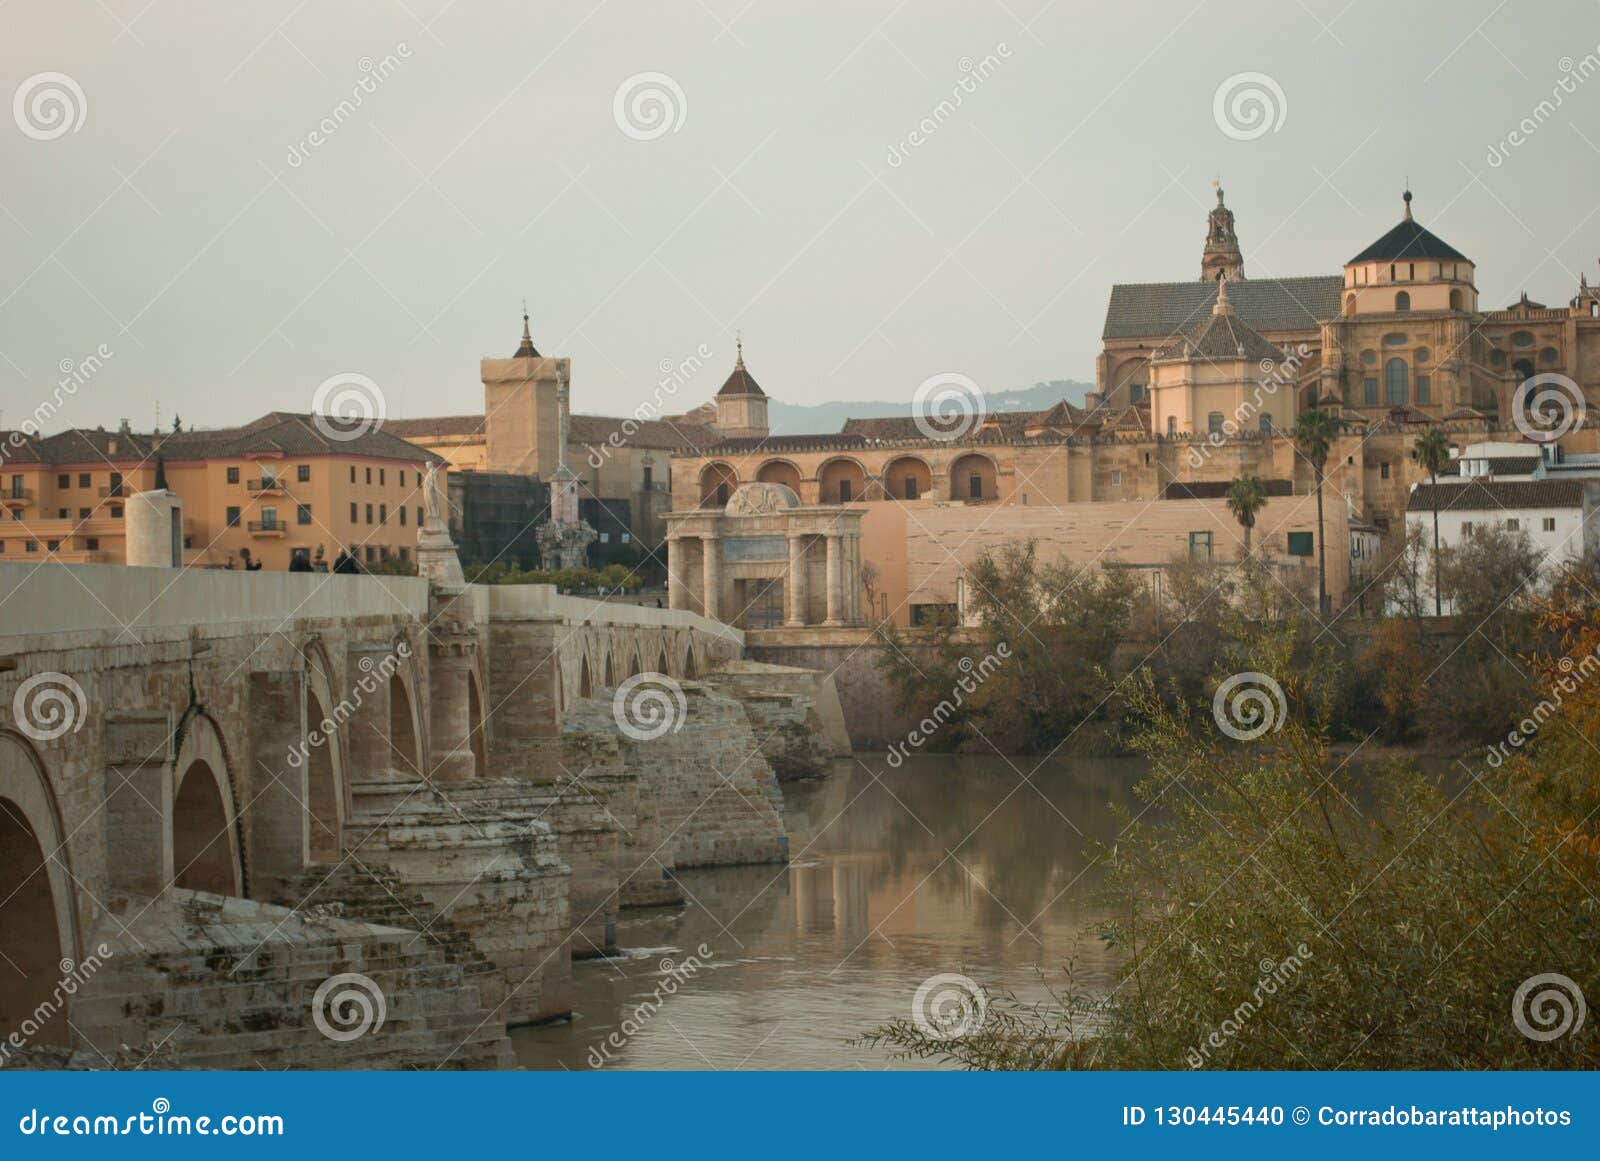 the beautiful roman bridge over the river guadalquivir leading to the town of cordoba in andalusia